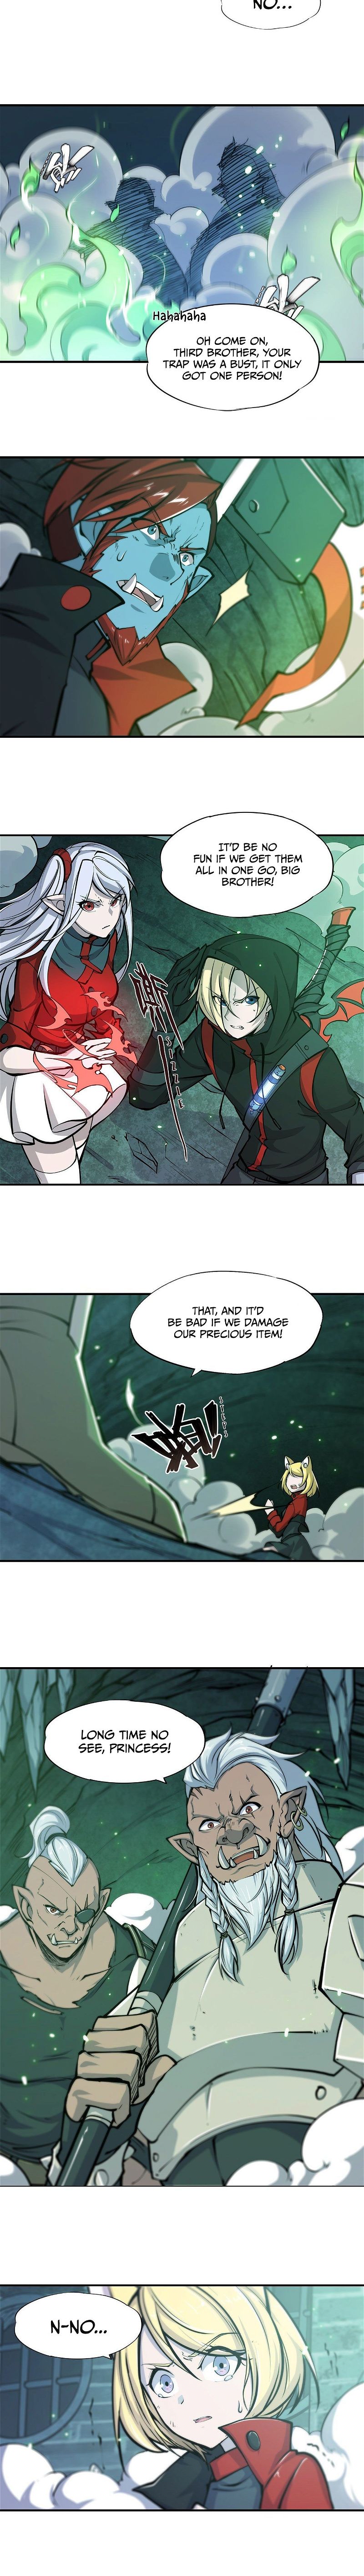 The Blood Princess and the Knight Chapter 66 page 7